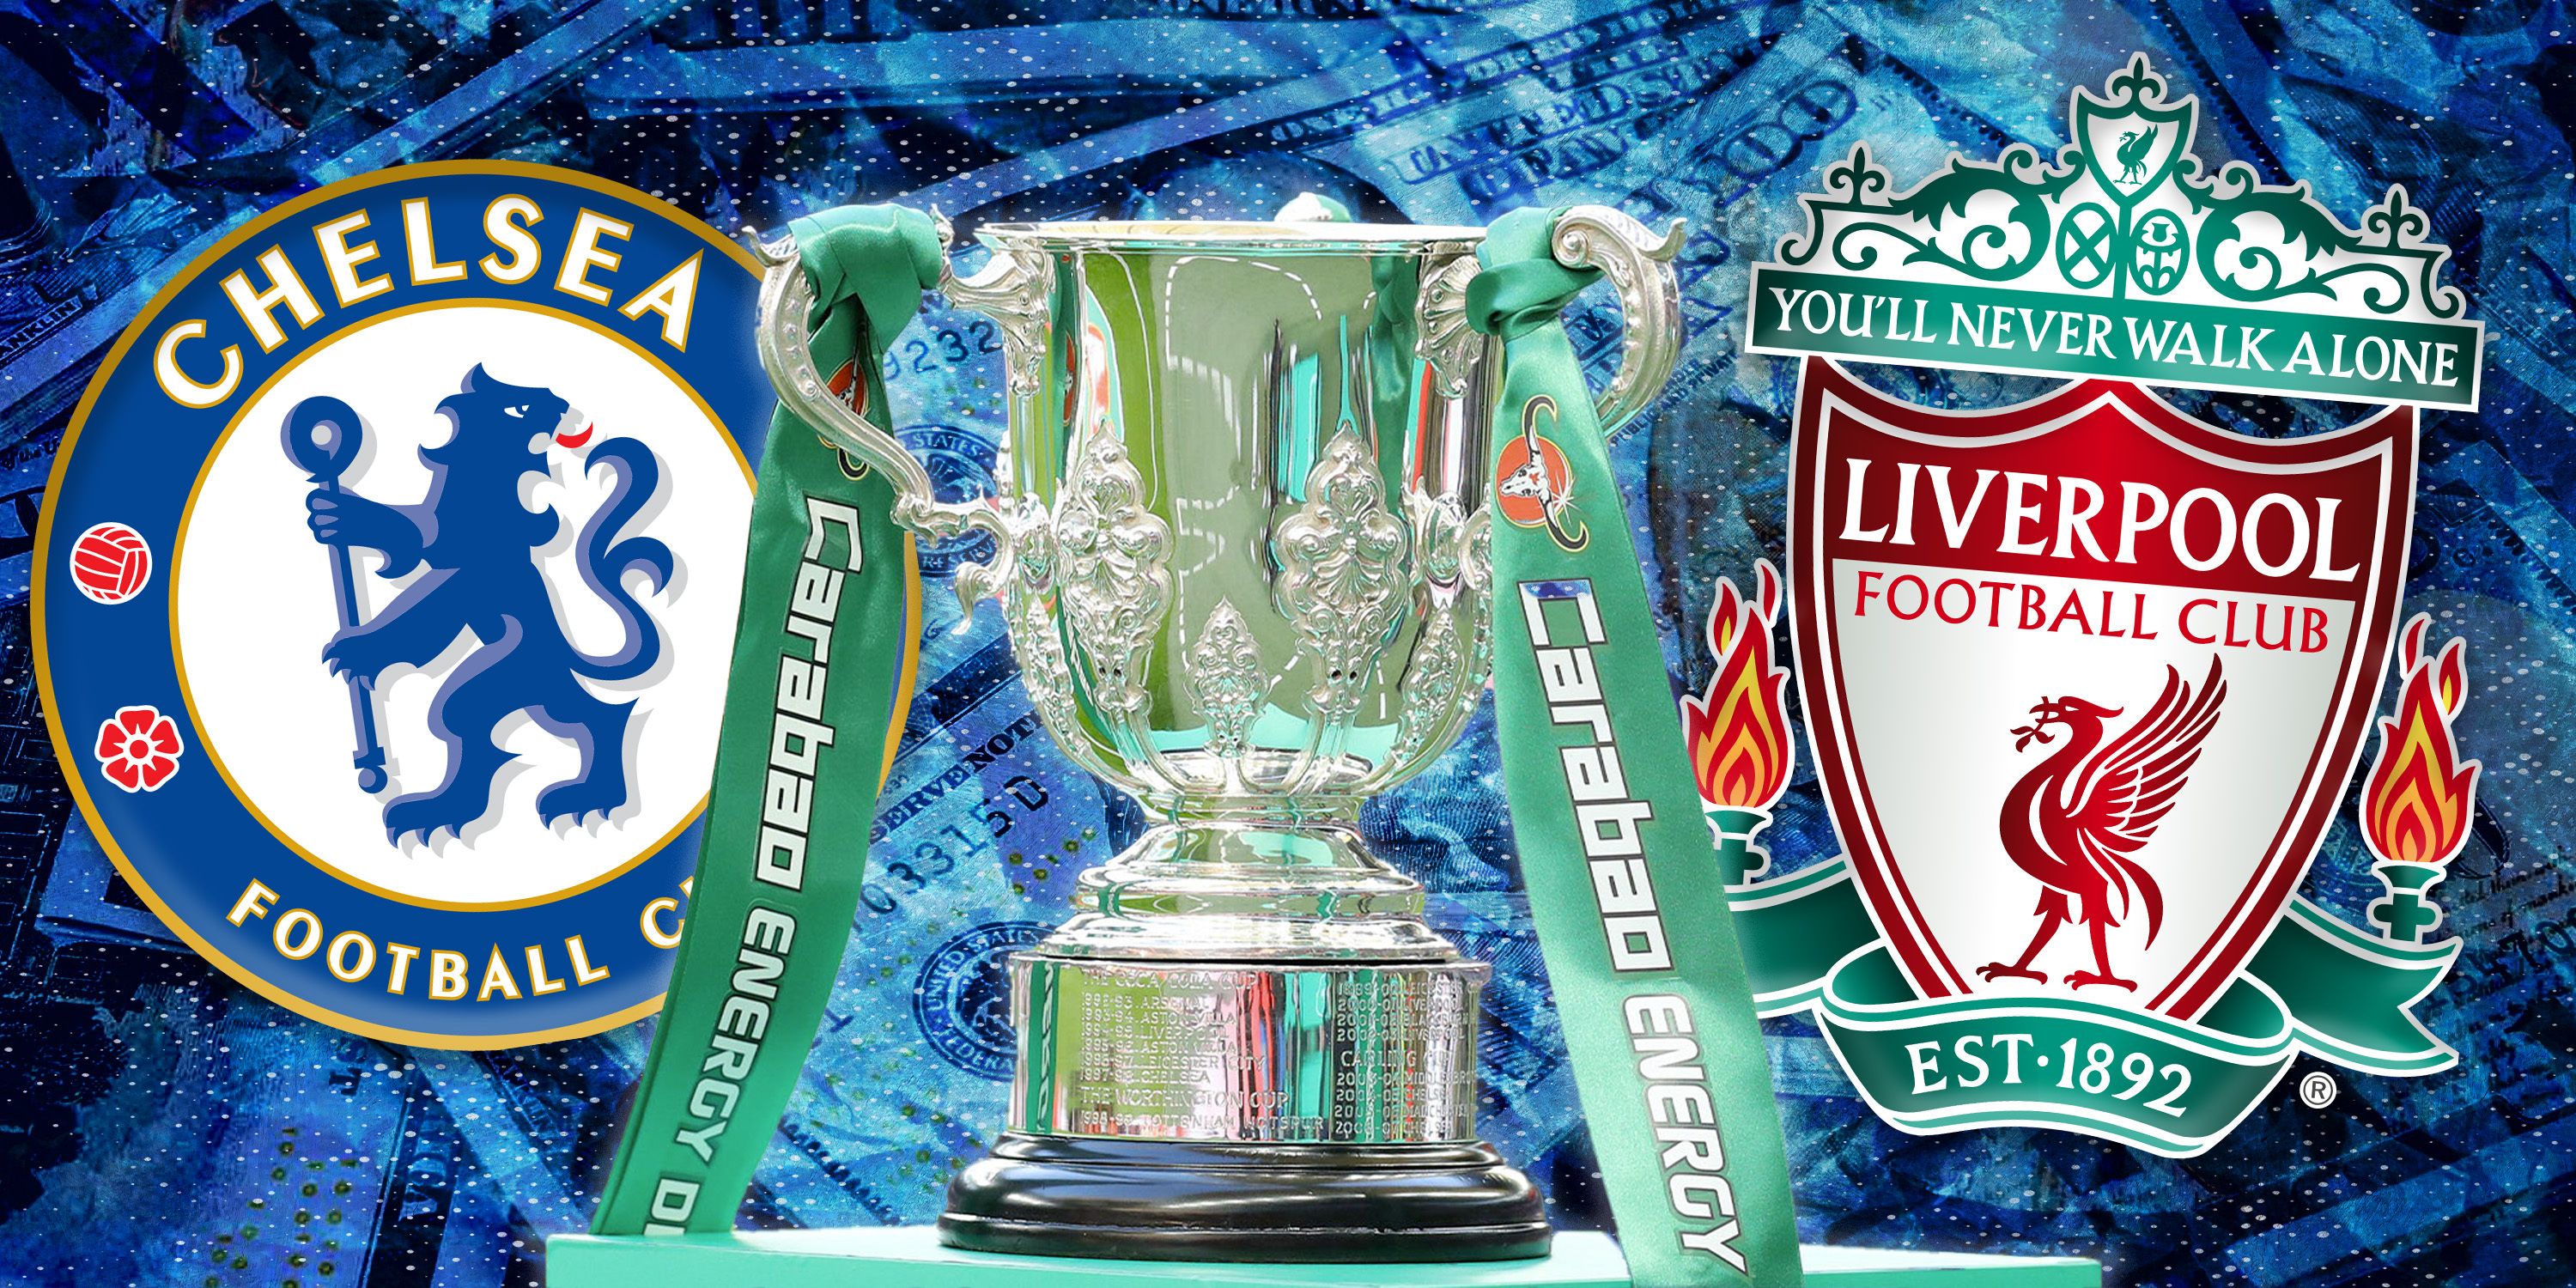 Liverpool and Chelsea badges with the Carabao Cup trophy and money imagery